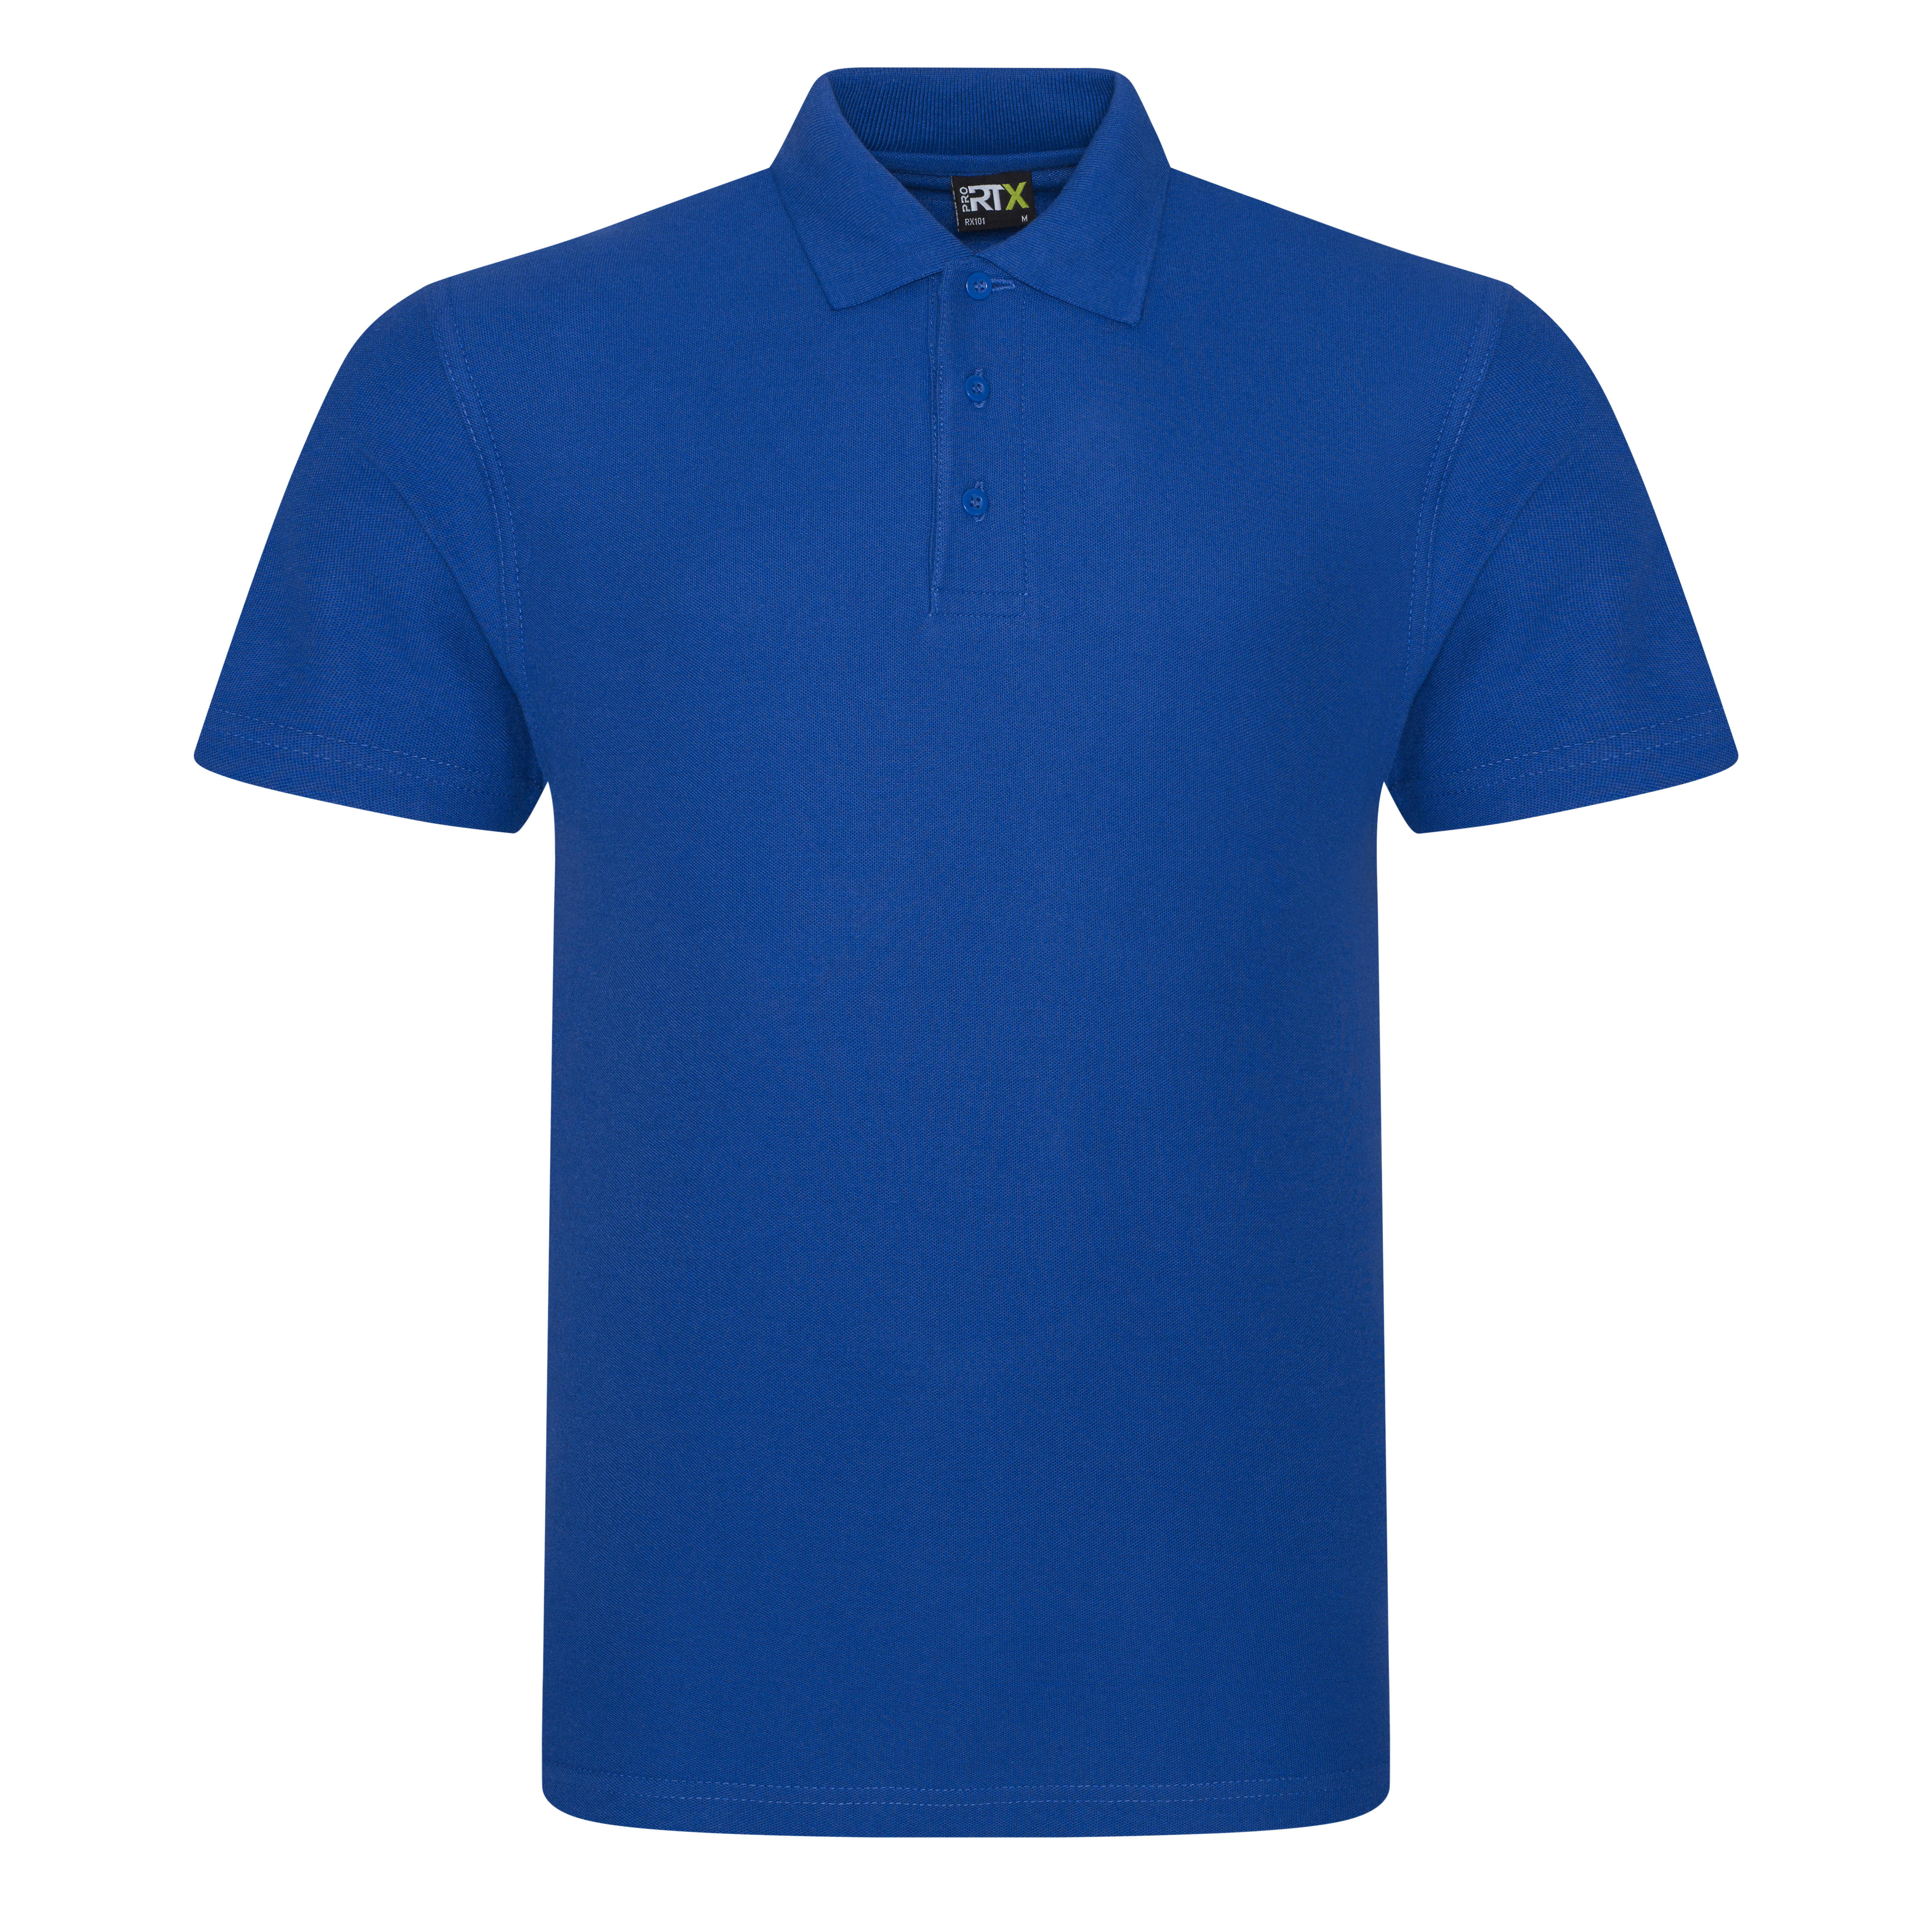 ax-httpswebsystems.s3.amazonaws.comtmp_for_downloadpro-polo-royal-blue.jpg